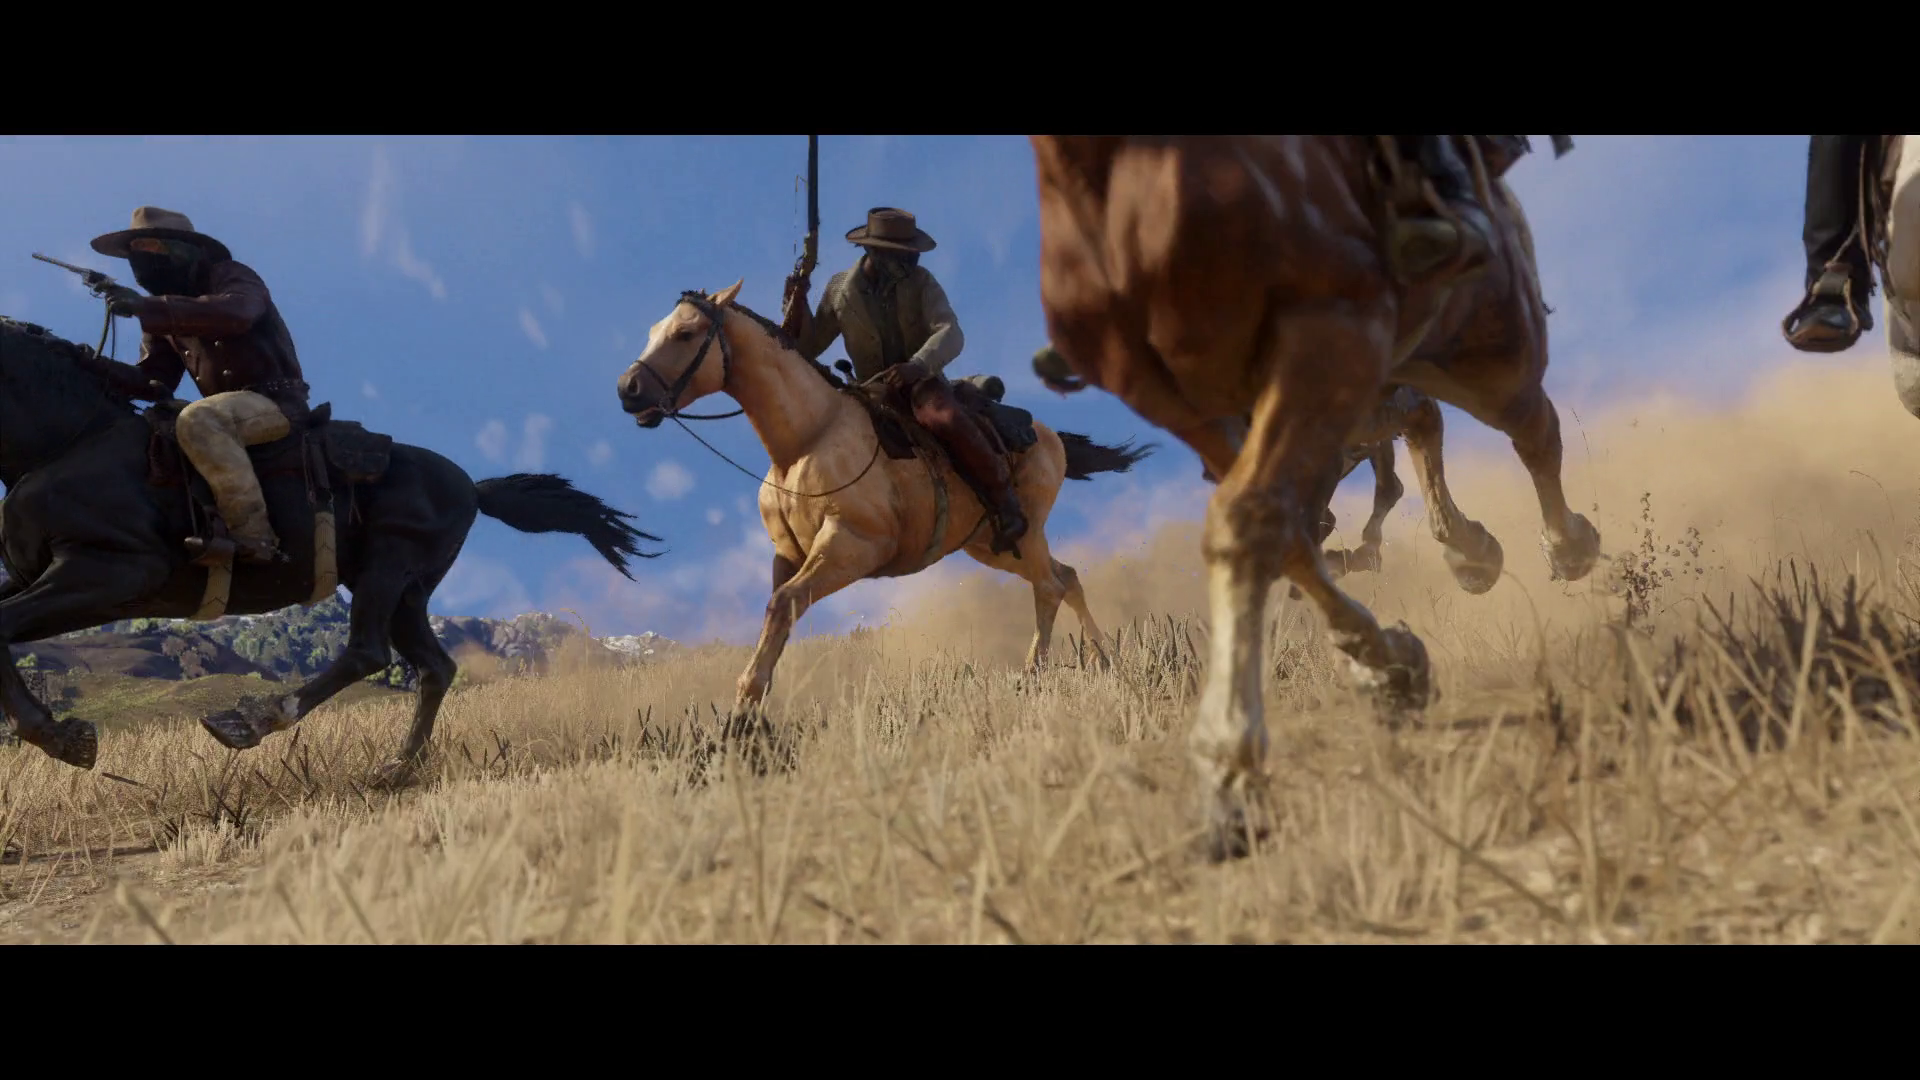 http://www.rdrvision.com/images/content/red-dead-redemption-2/trailer_1/red-dead-redemption-2_trailer-1_27.png